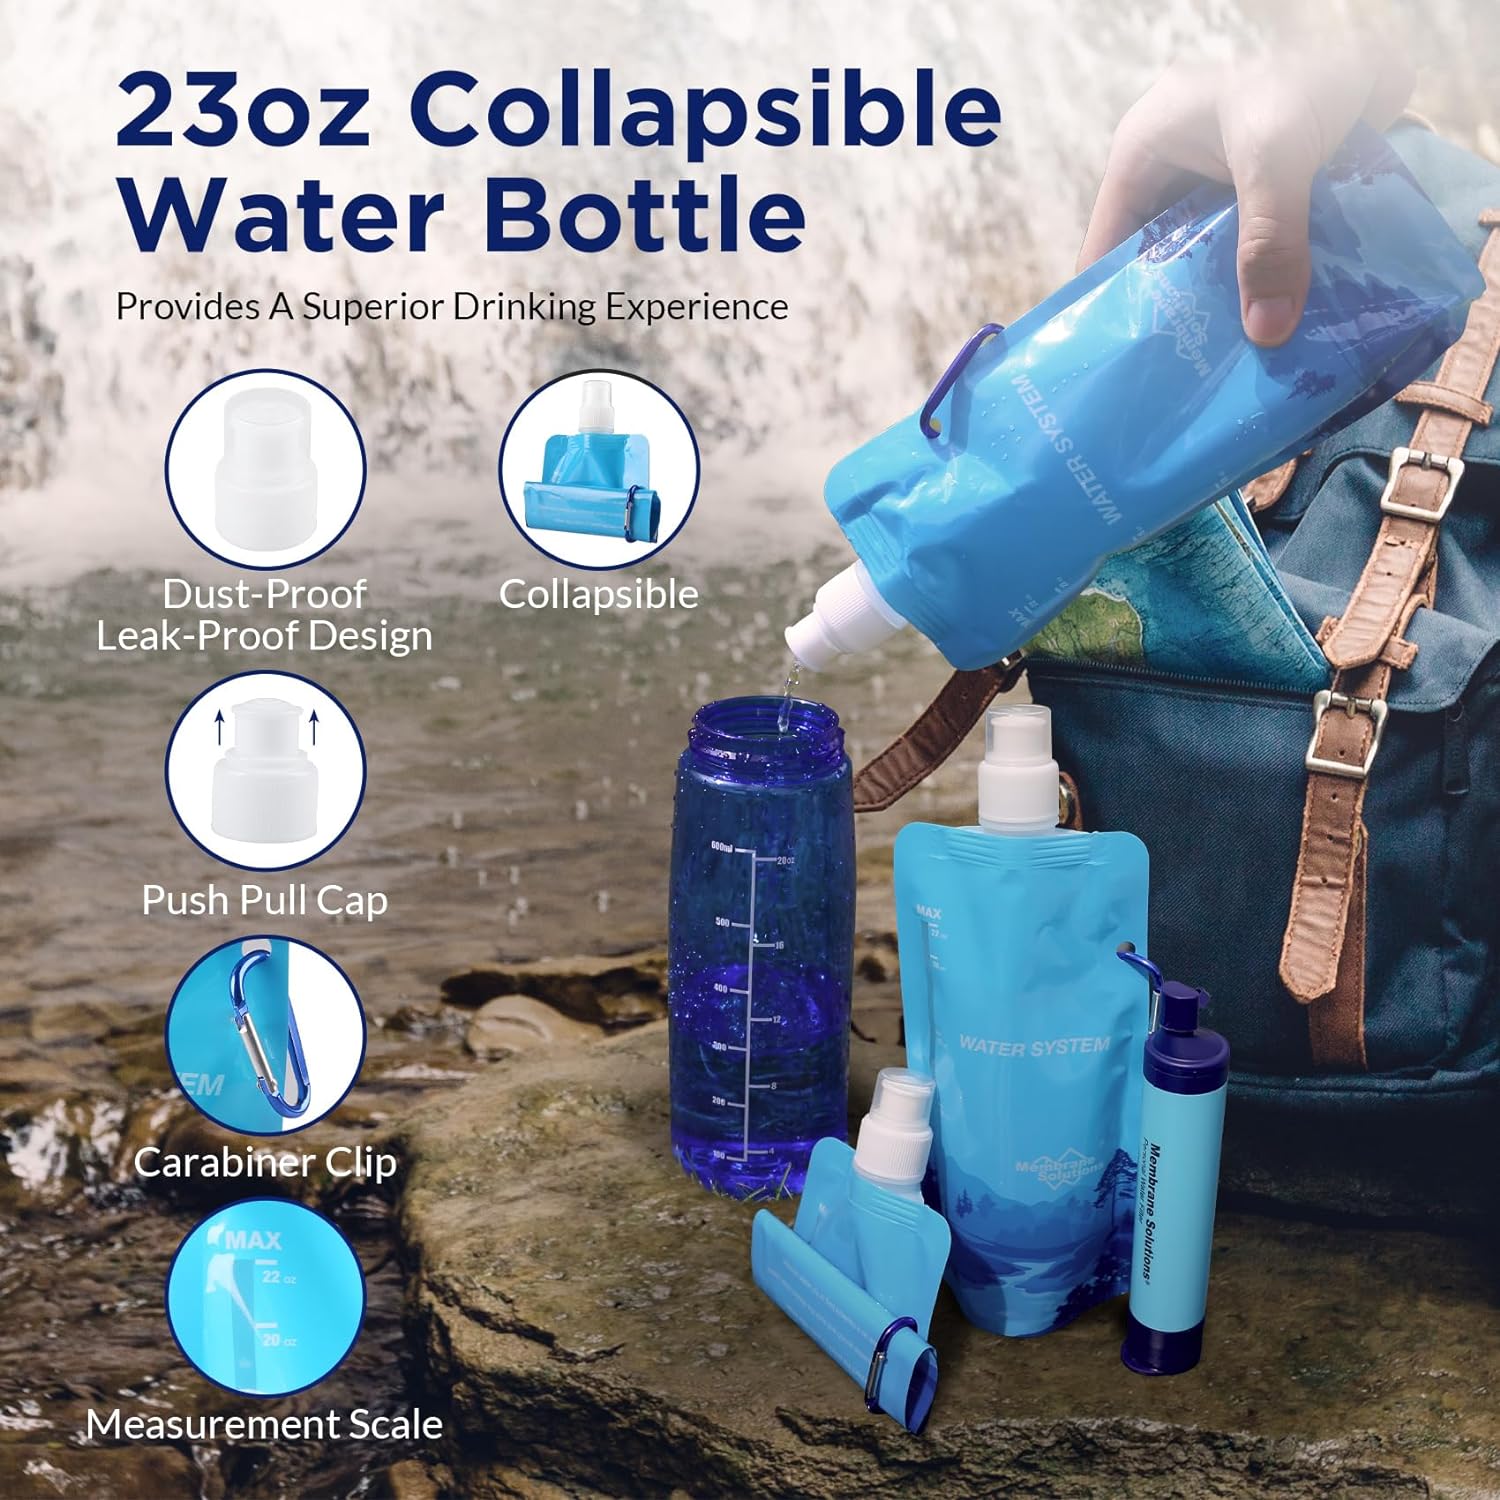 Membrane Solutions Squeezable Water Filtration System | Water Purification Kit Survival for Hiking Camping Travel